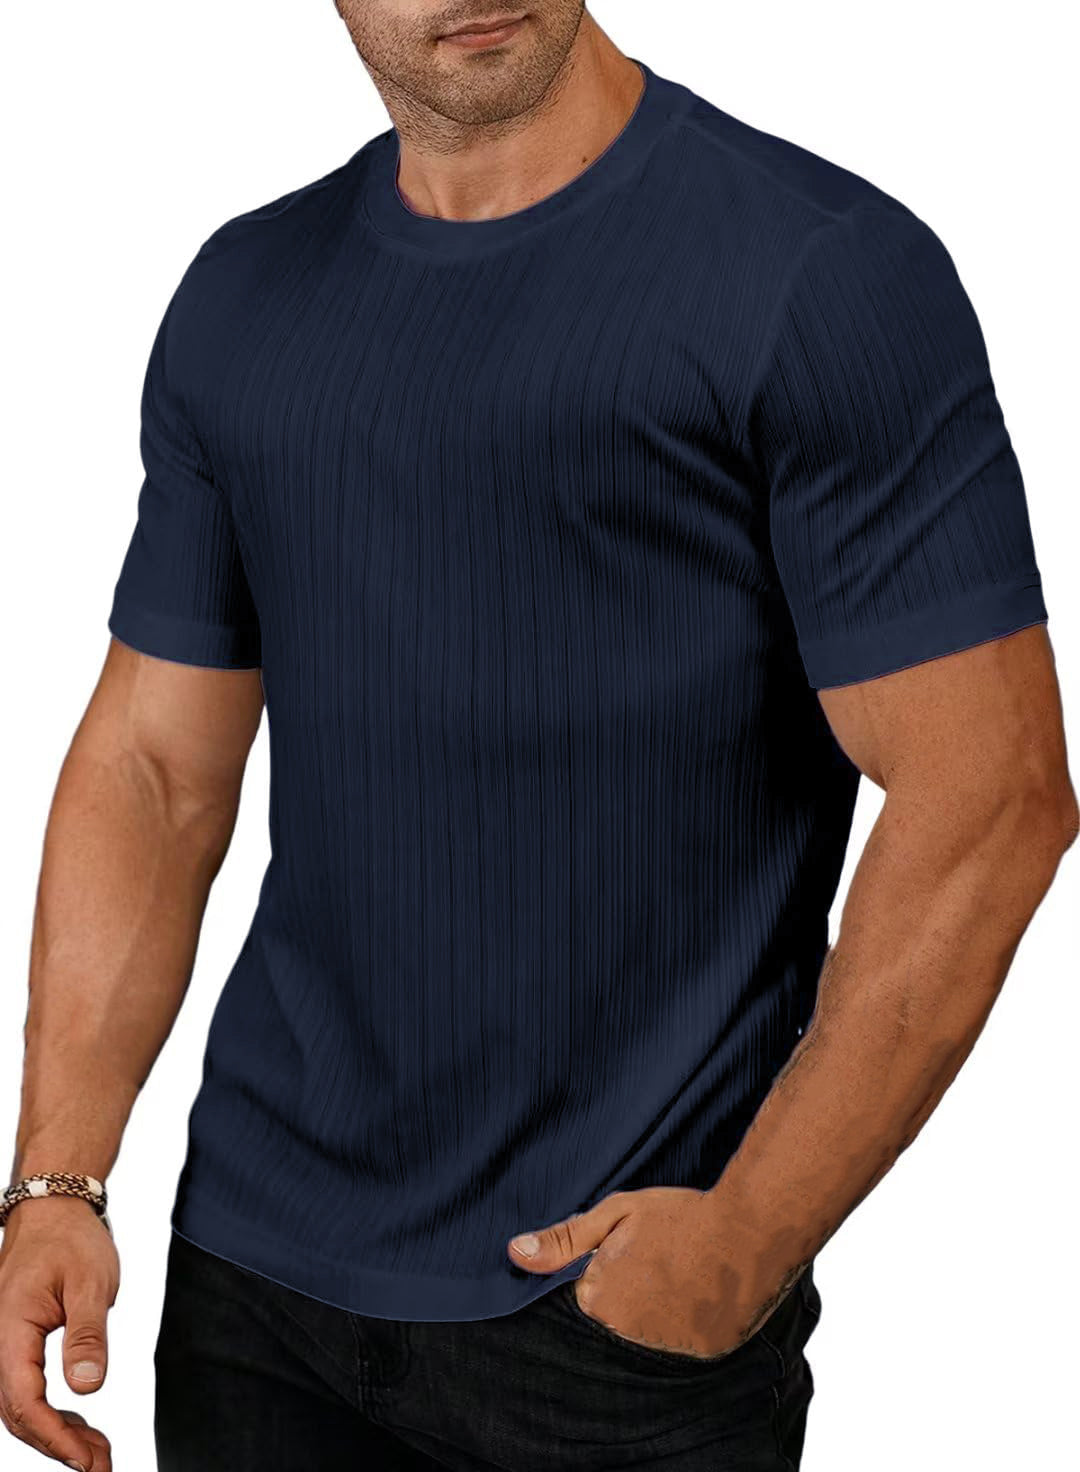 Men's Casual Striped Slim Fit Short-sleeved T-shirt